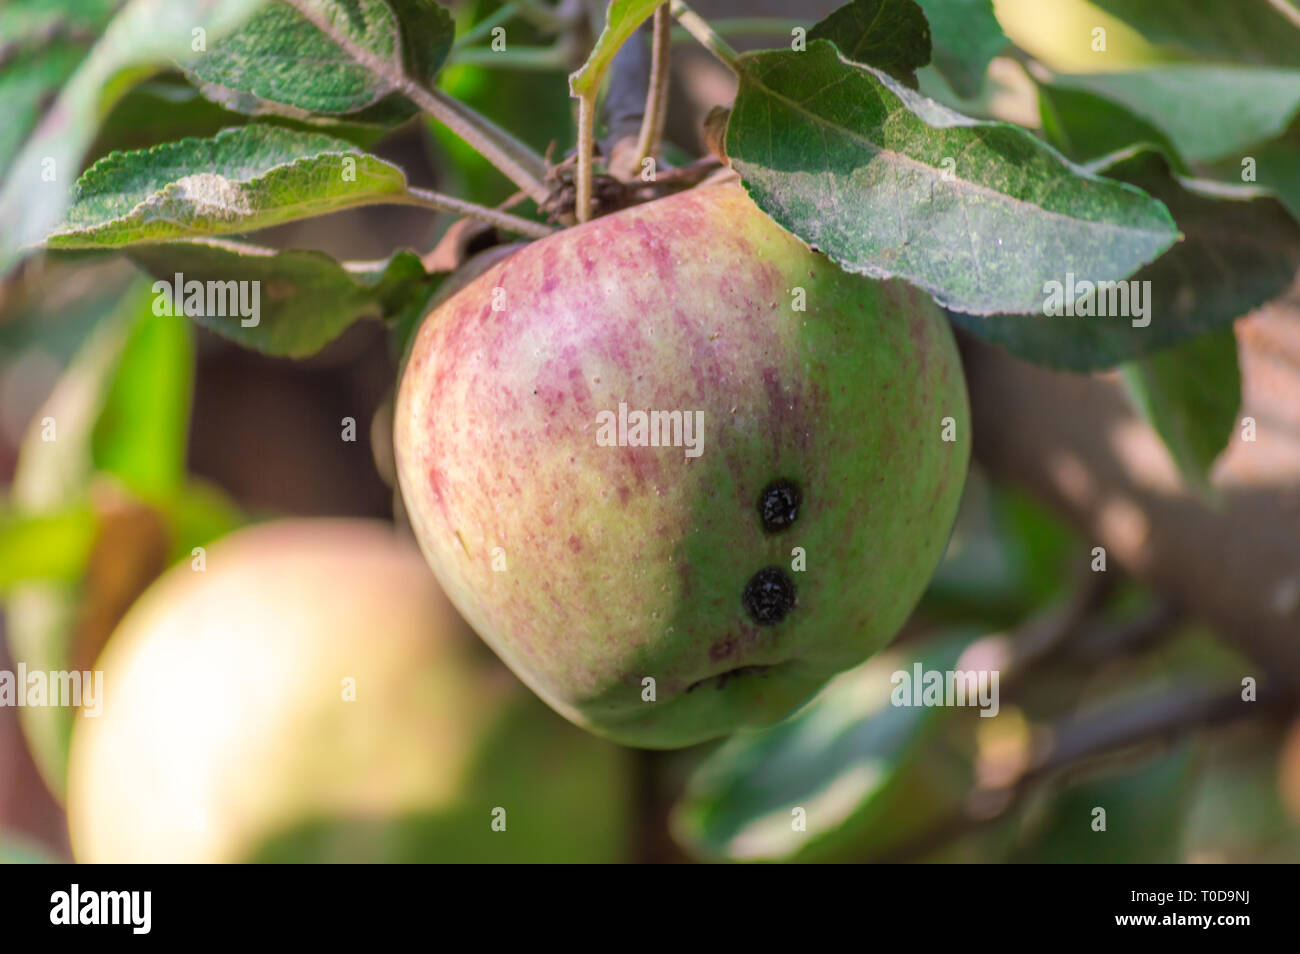 Apples spoilt by pests, insects, plant disease, eaten by birds, before being harvested Stock Photo